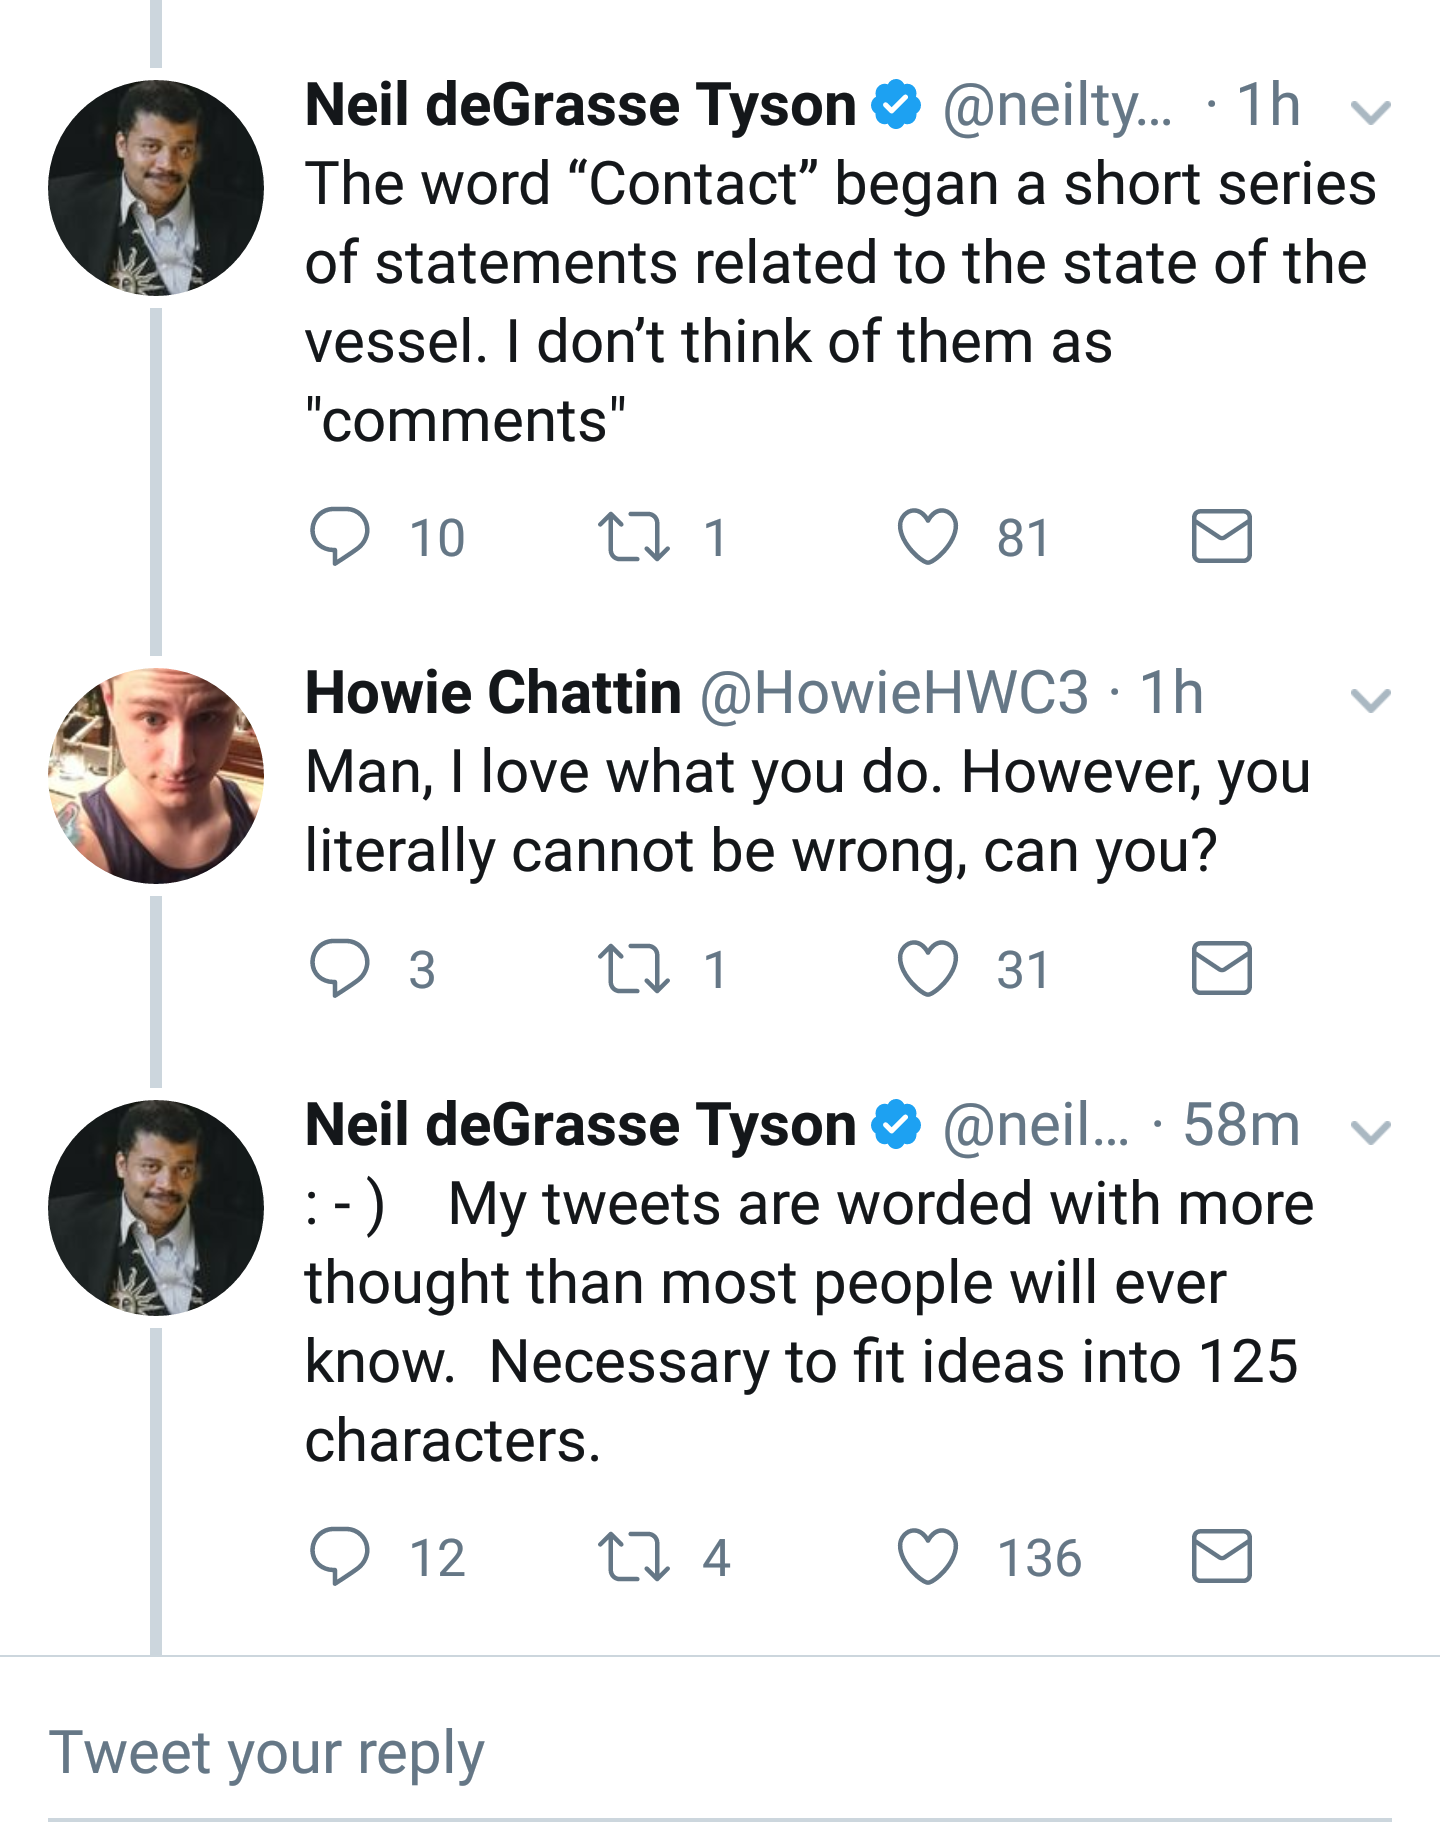 Neil DeGrasse Tyson Is Proven Wrong And Uses The Old "I'm Too Smart For You To Understand Me" Bullshit Excuse